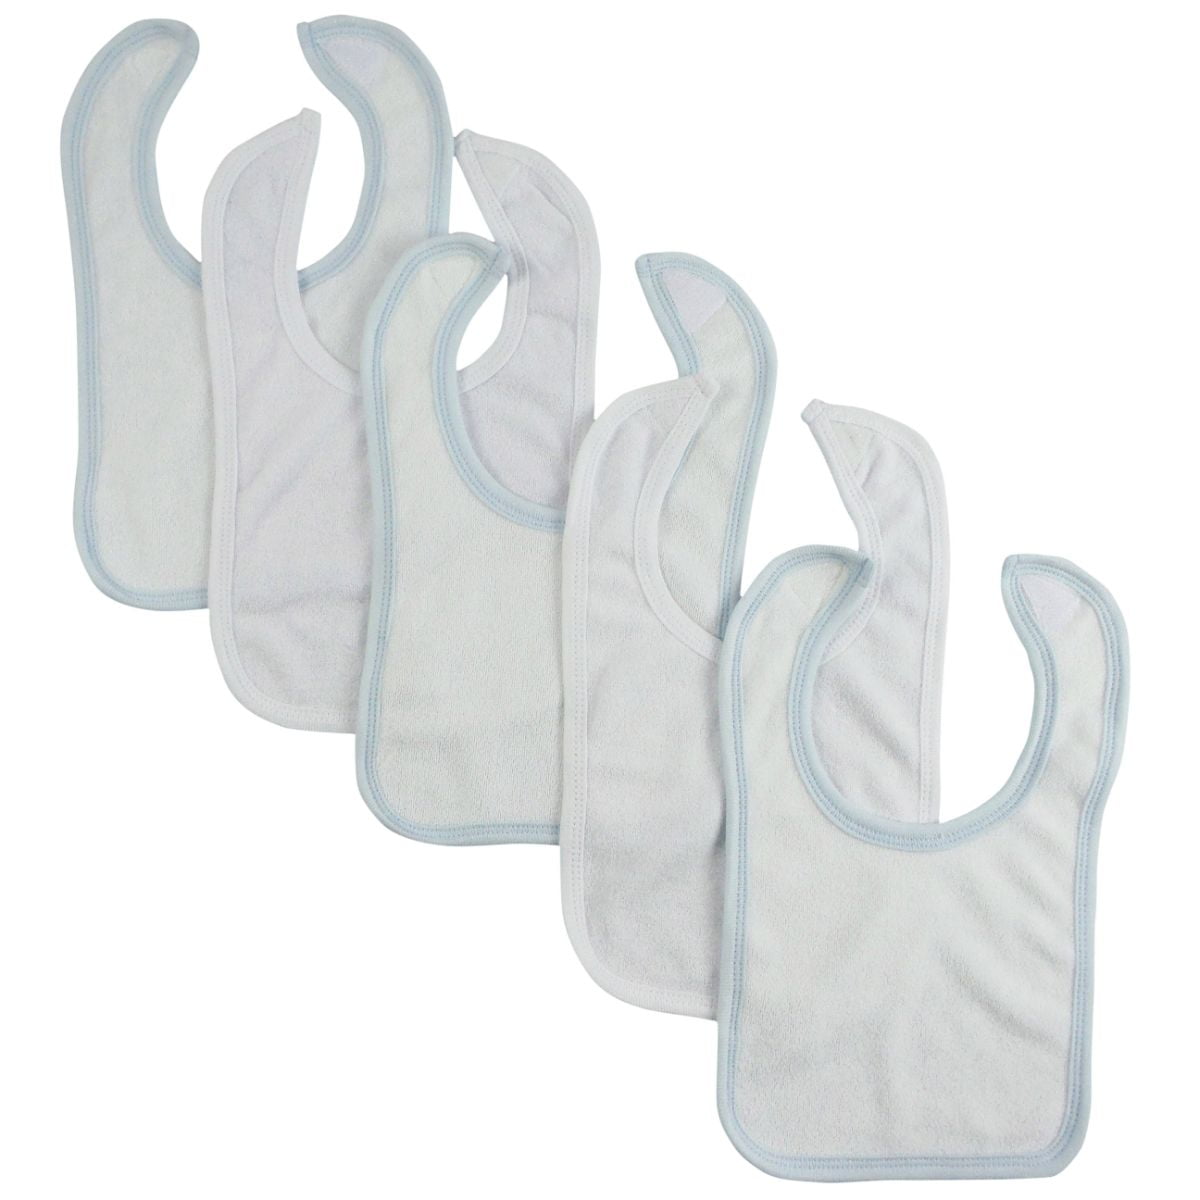 12.25 X 7.5 In. Infant Boys Drool Bibs, White & Blue - Pack Of 5